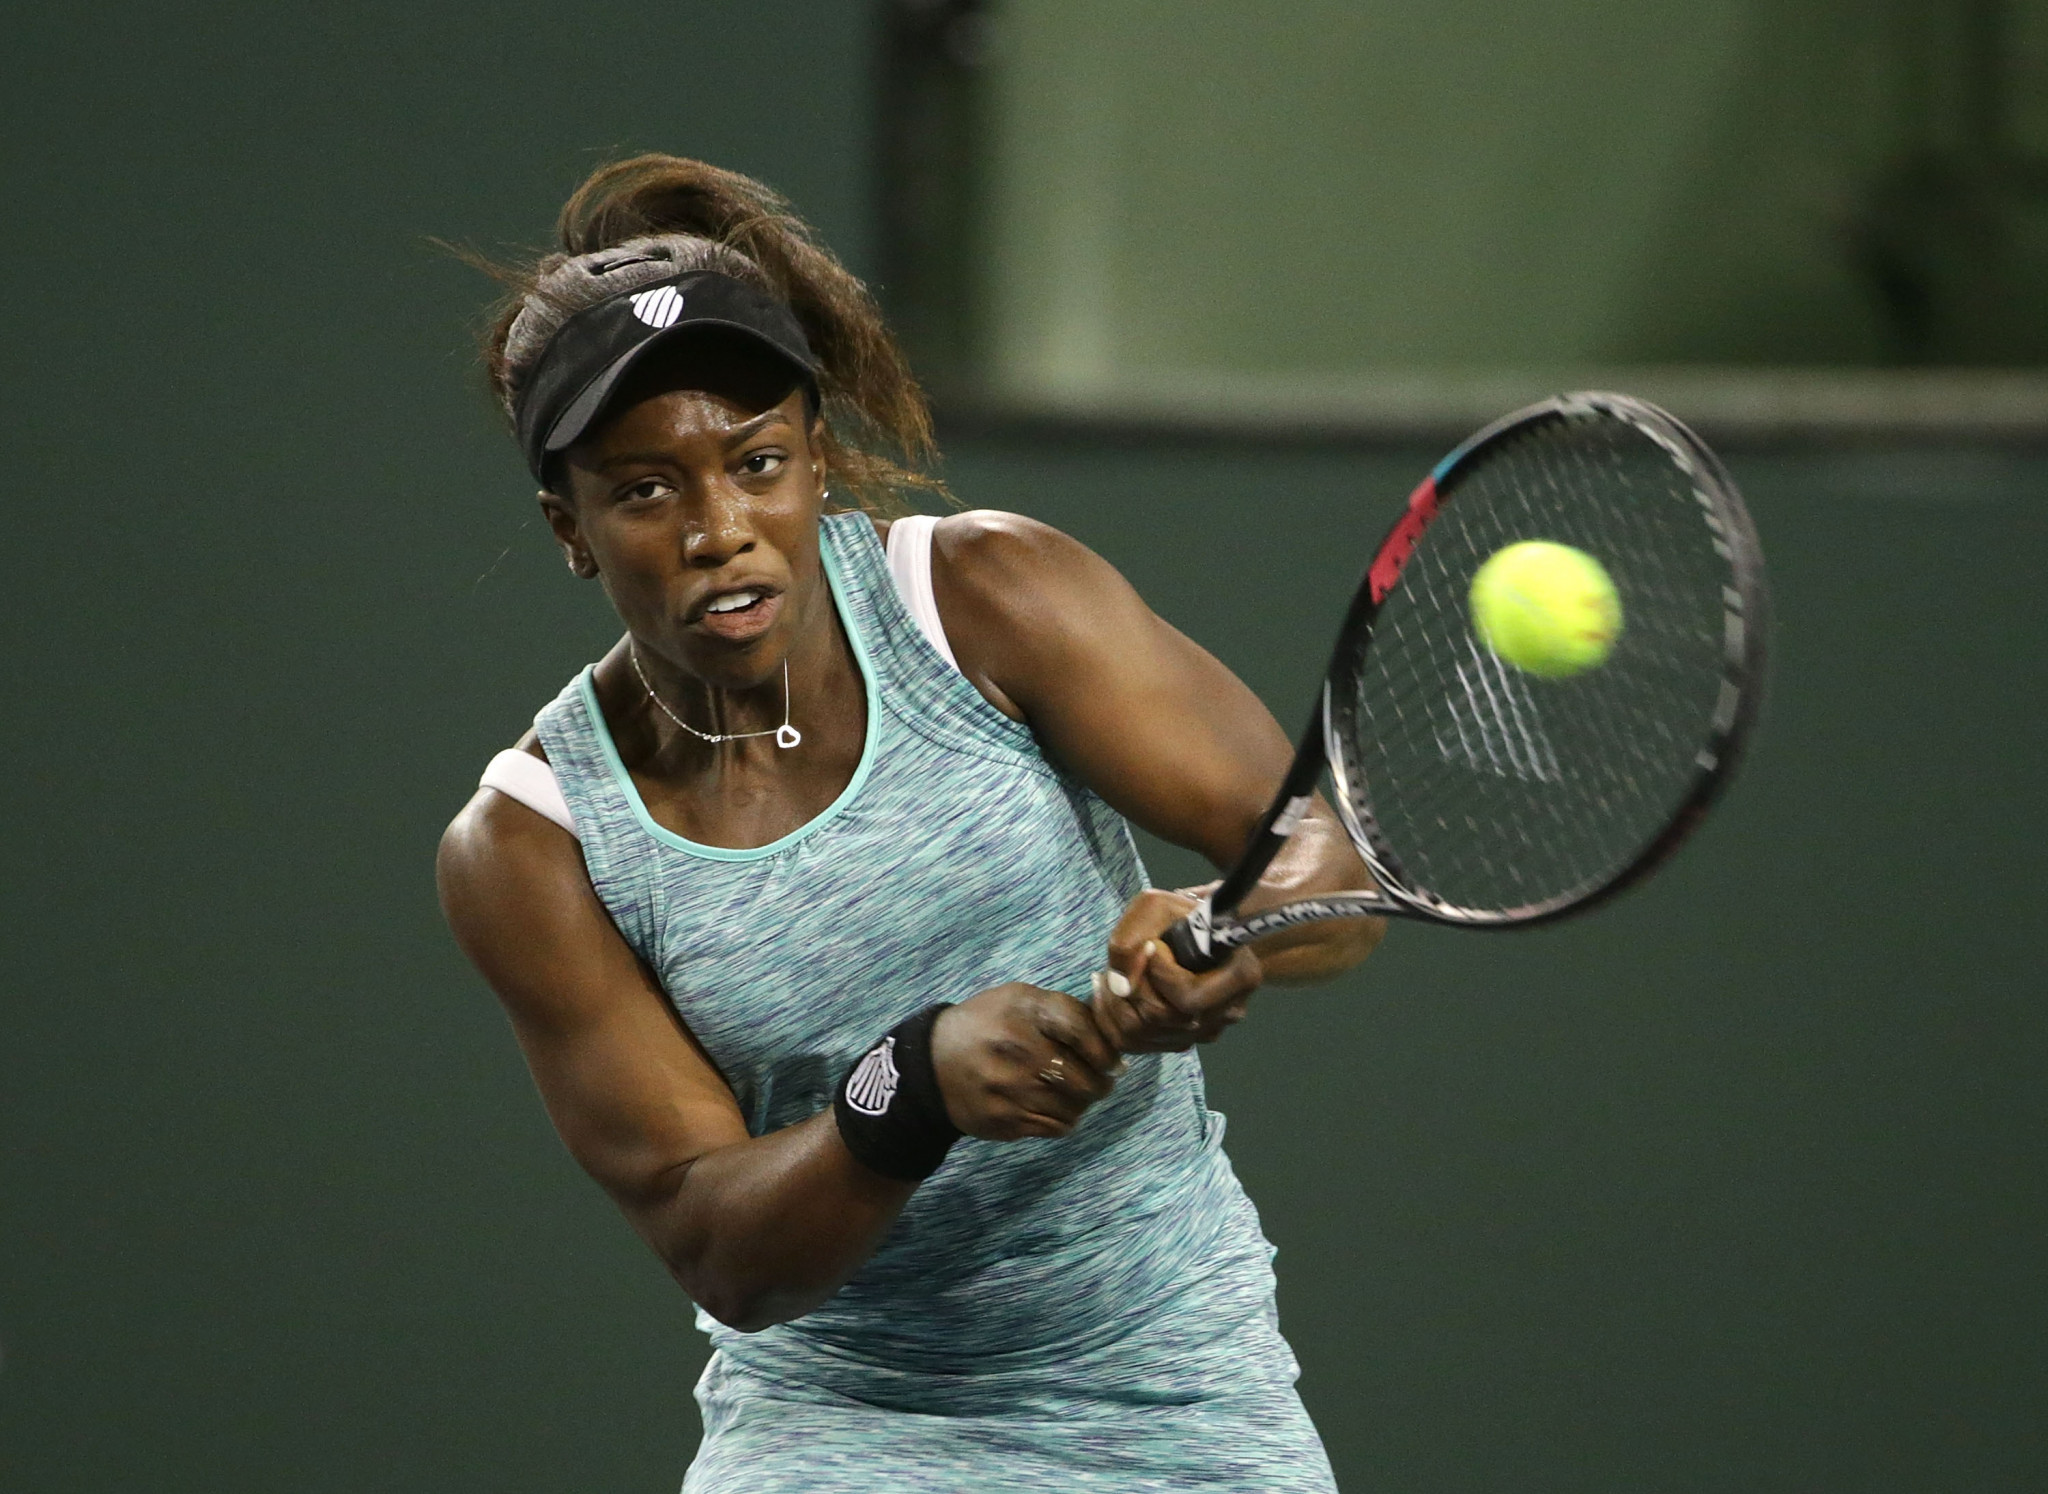 Sachia Vickery produced a shock victory at Indian Wells ©Getty Images